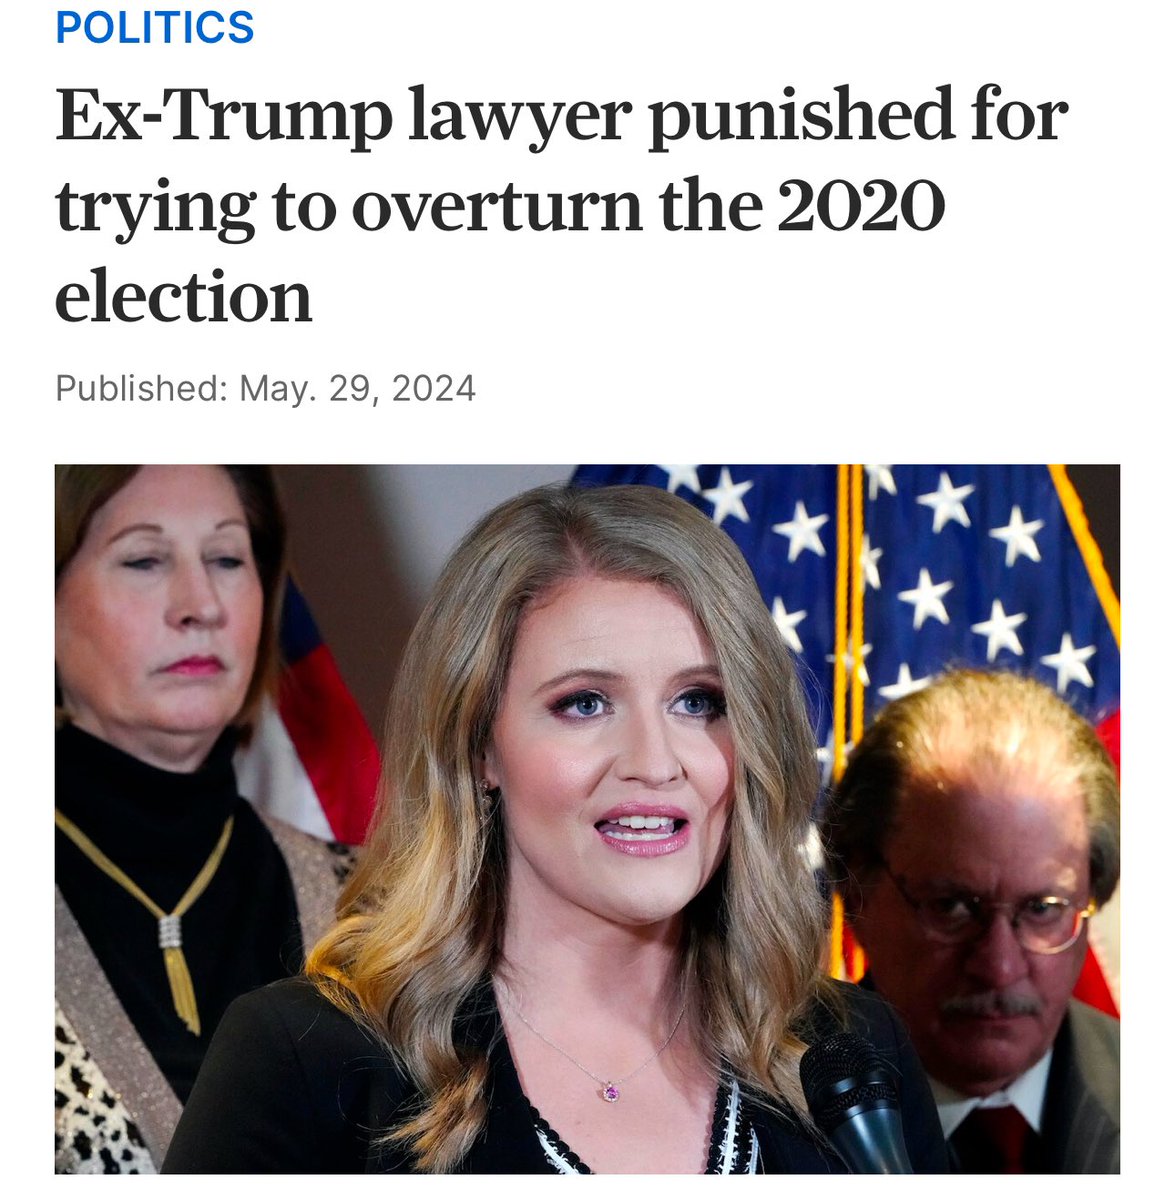 Former trump lawyer has been barred from practicing law for 3 years in her home state of Colorado for her part in trying to overturn the 2020 election. It’s a great day for America. Trump was found guilty of 34 felonies & Jenna Ellis gets disbarred #TrumpsGuilty